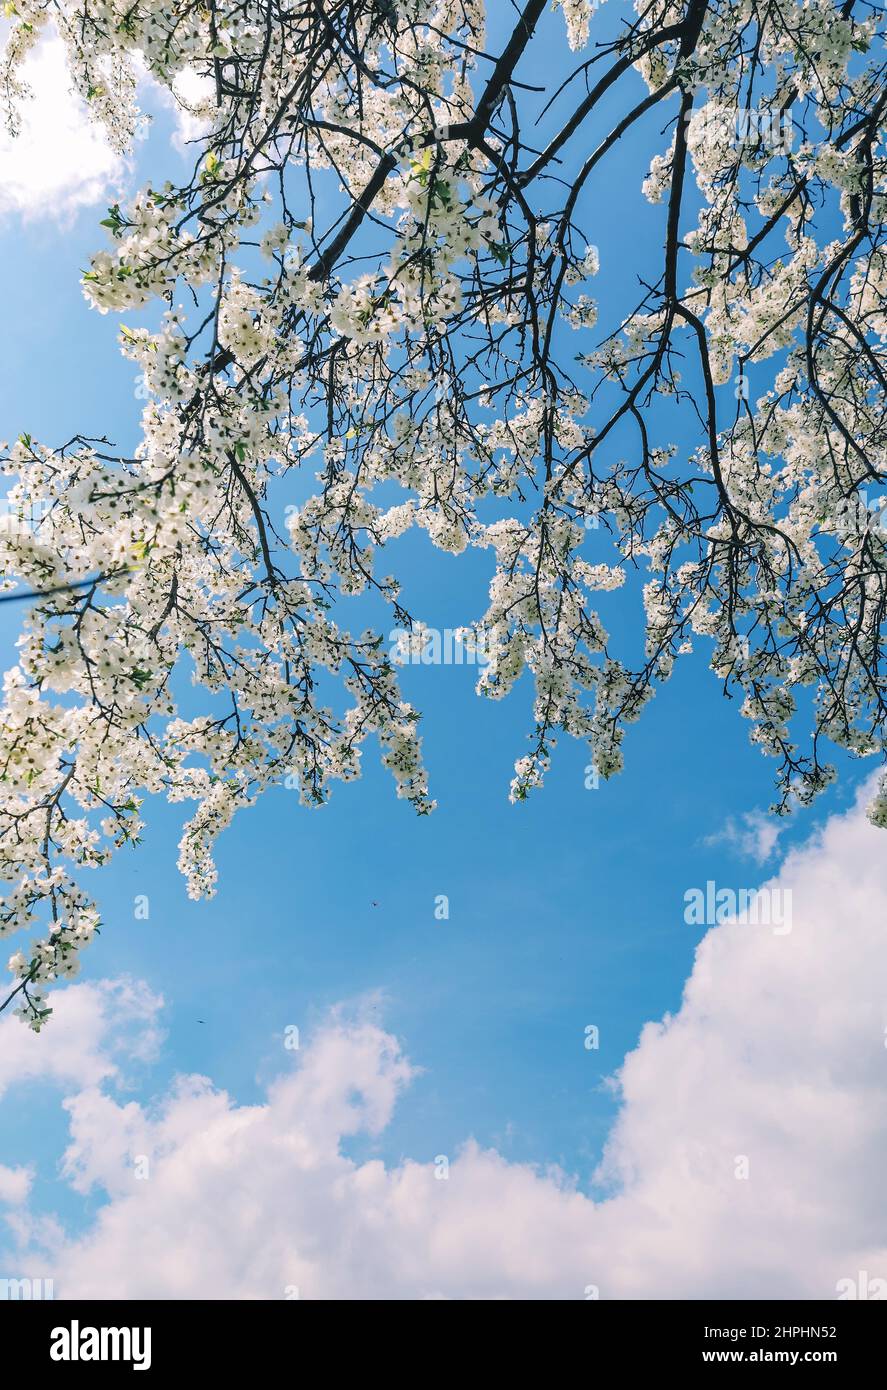 blue bright sky and branches of cherry blossom tree with white flowers Stock Photo